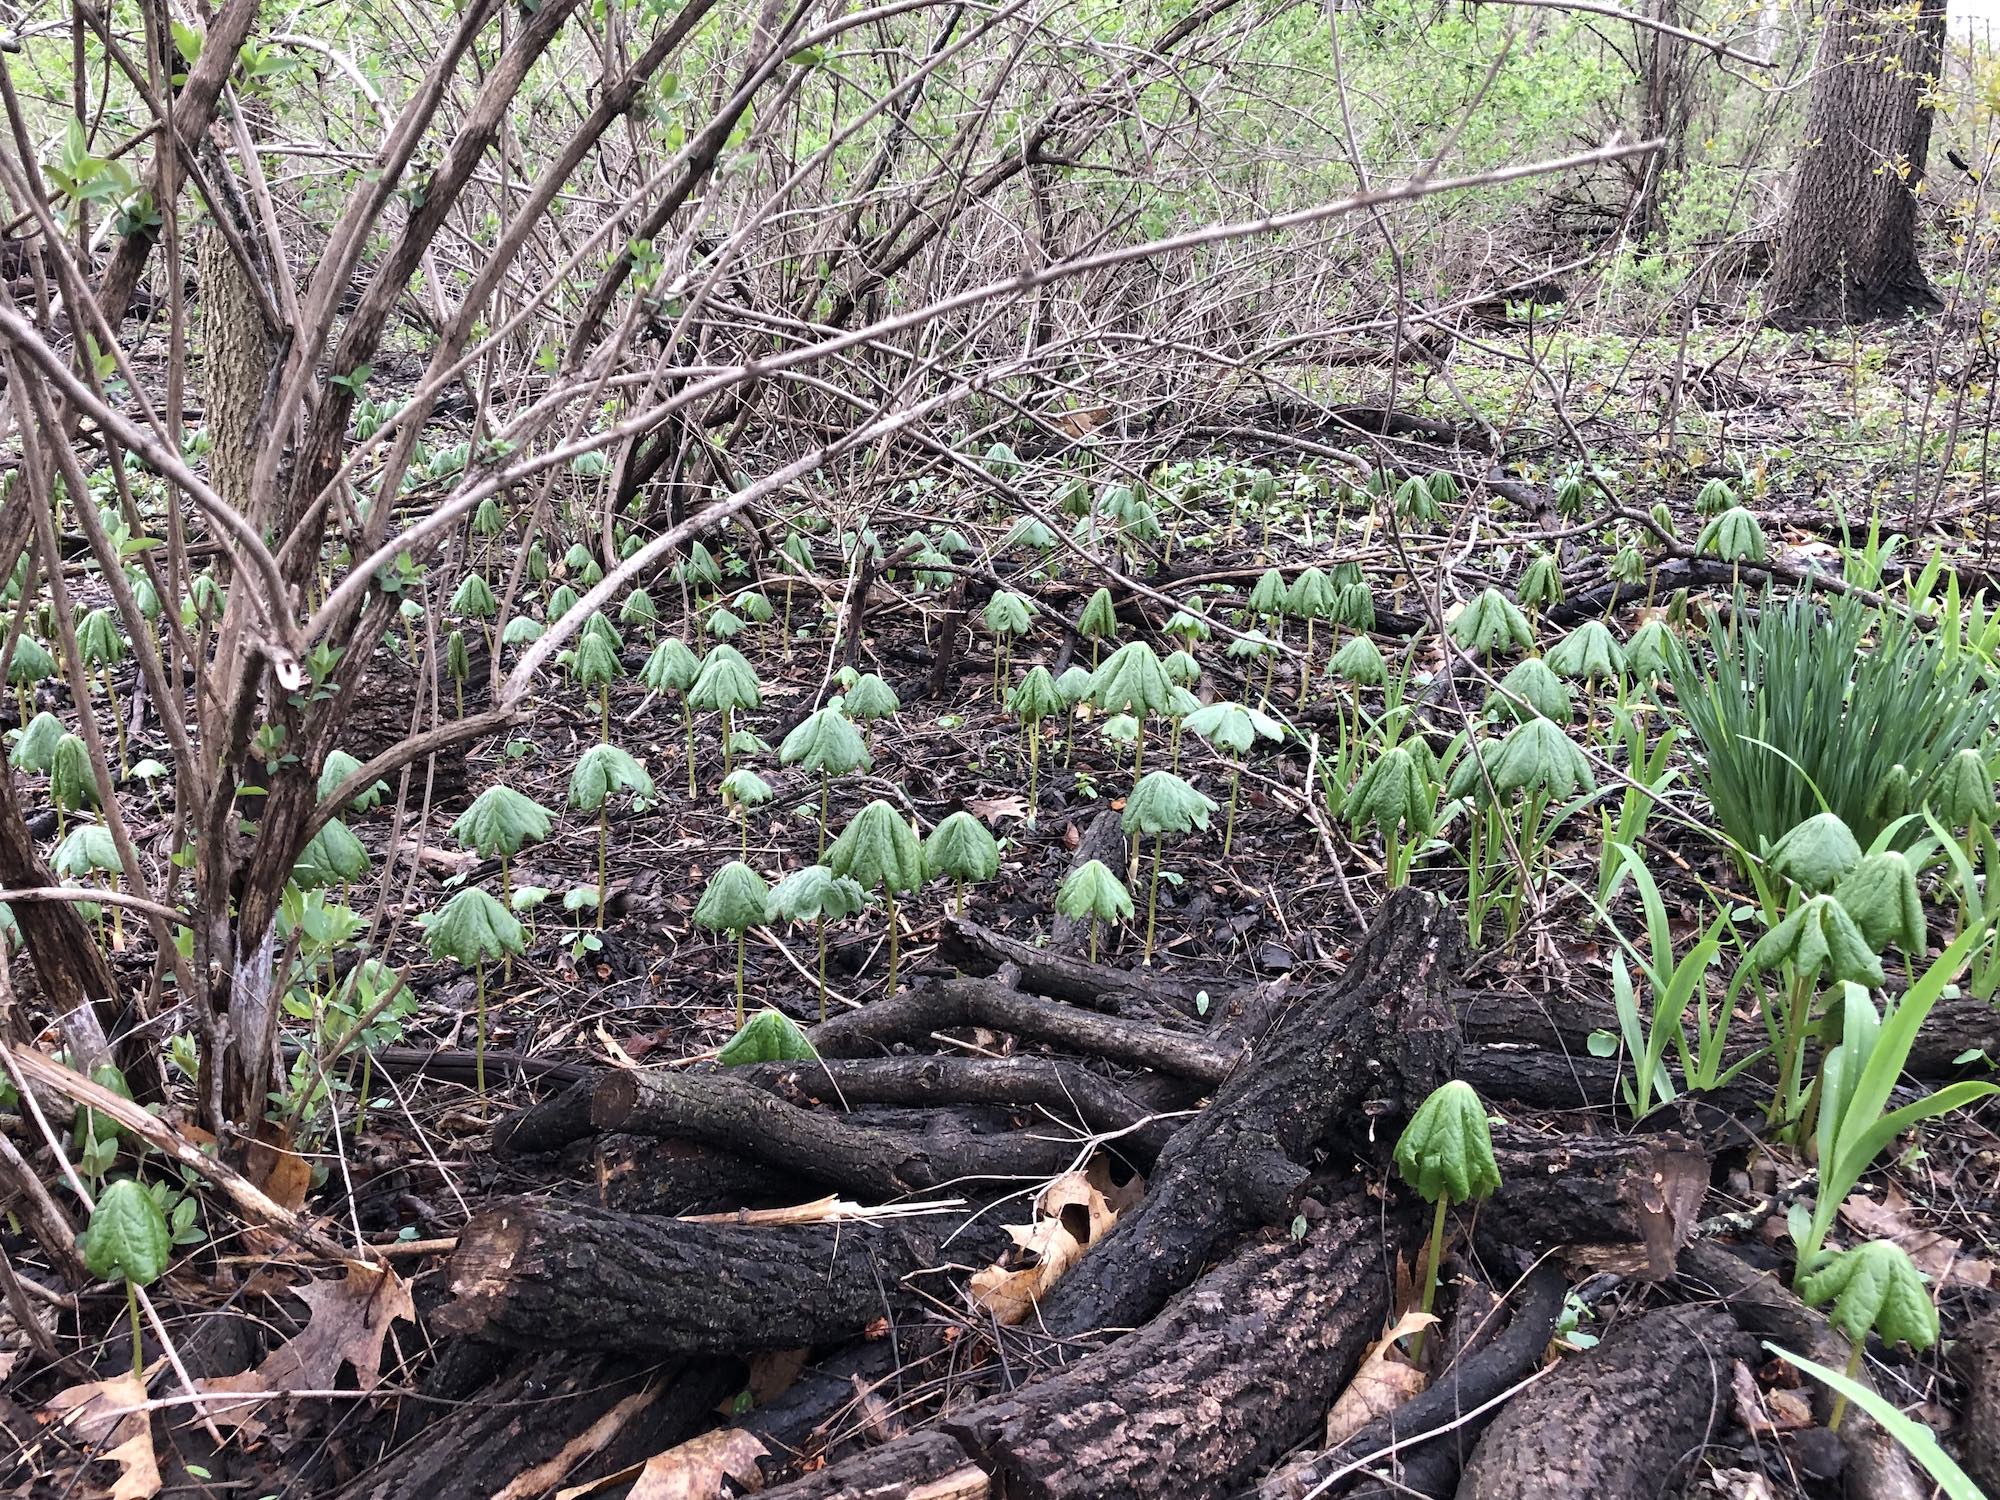 Mayapple in woods between Marion Dunn and Duck Pond on April 23, 2019.